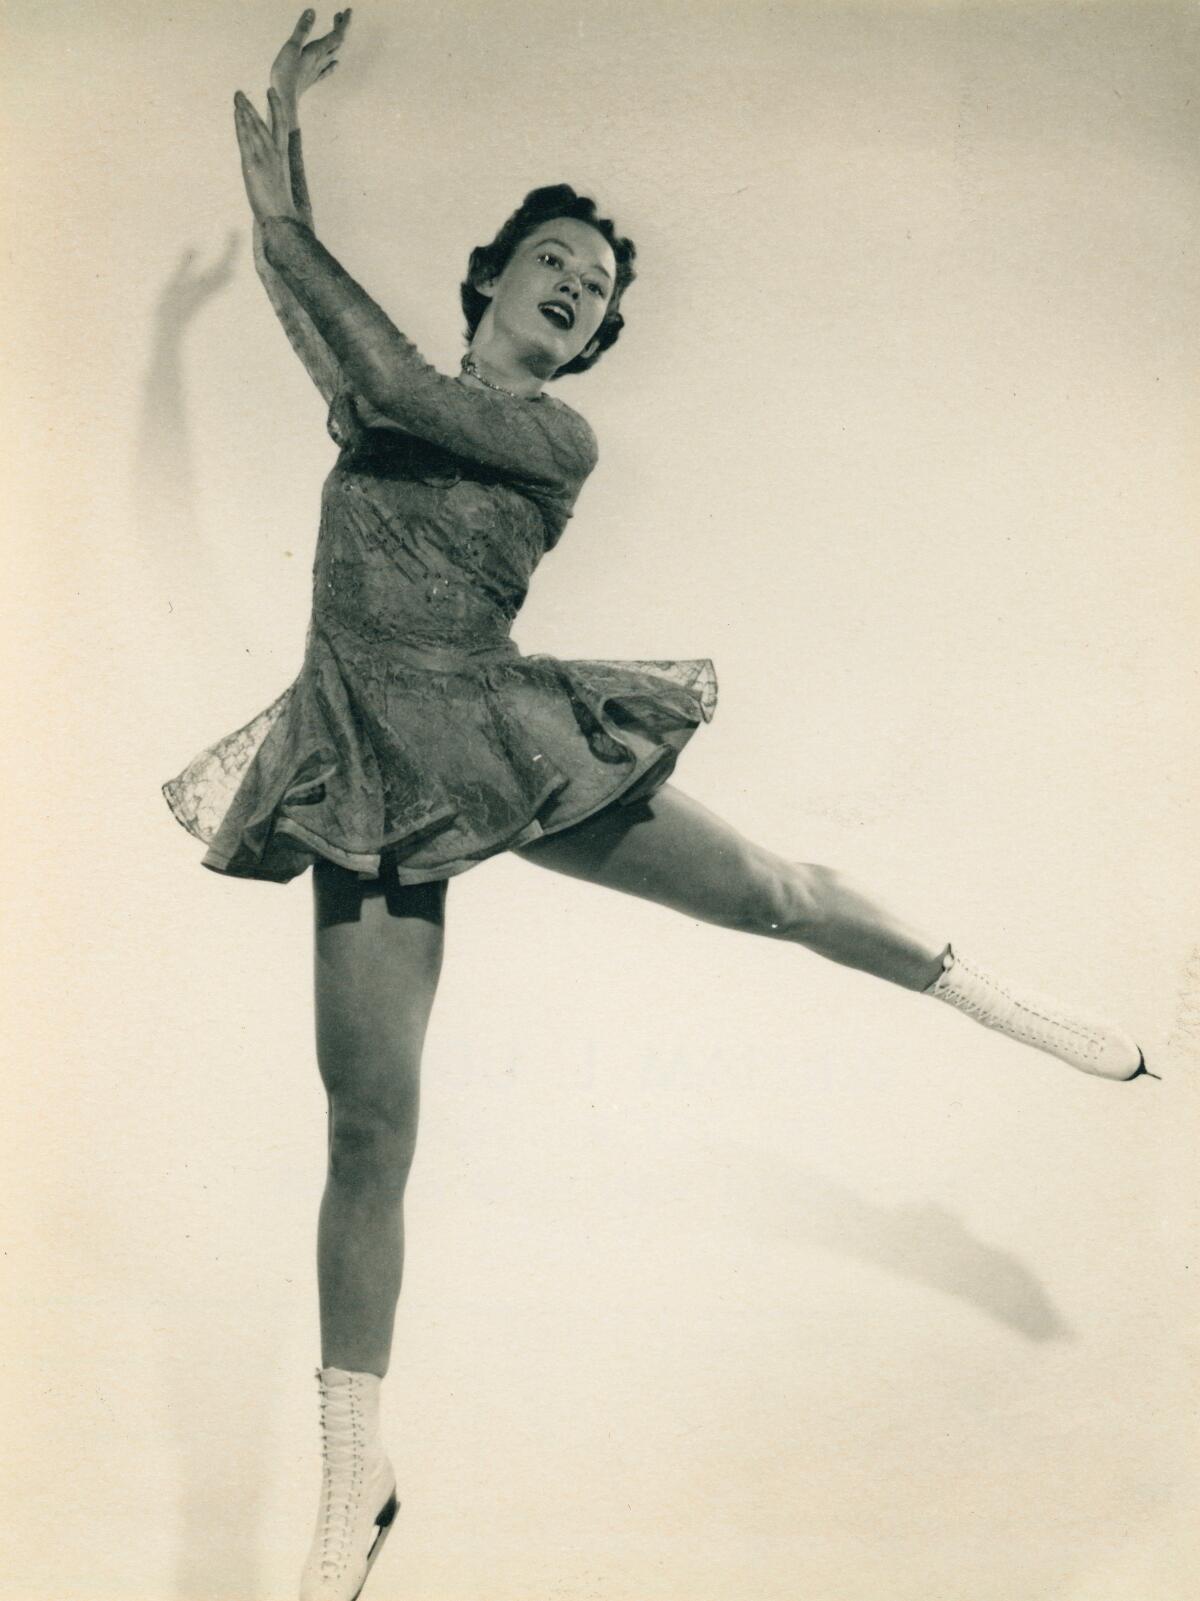 Sandy Sewell, in a photo taken in the 1950s, poses in ice-skating attire.